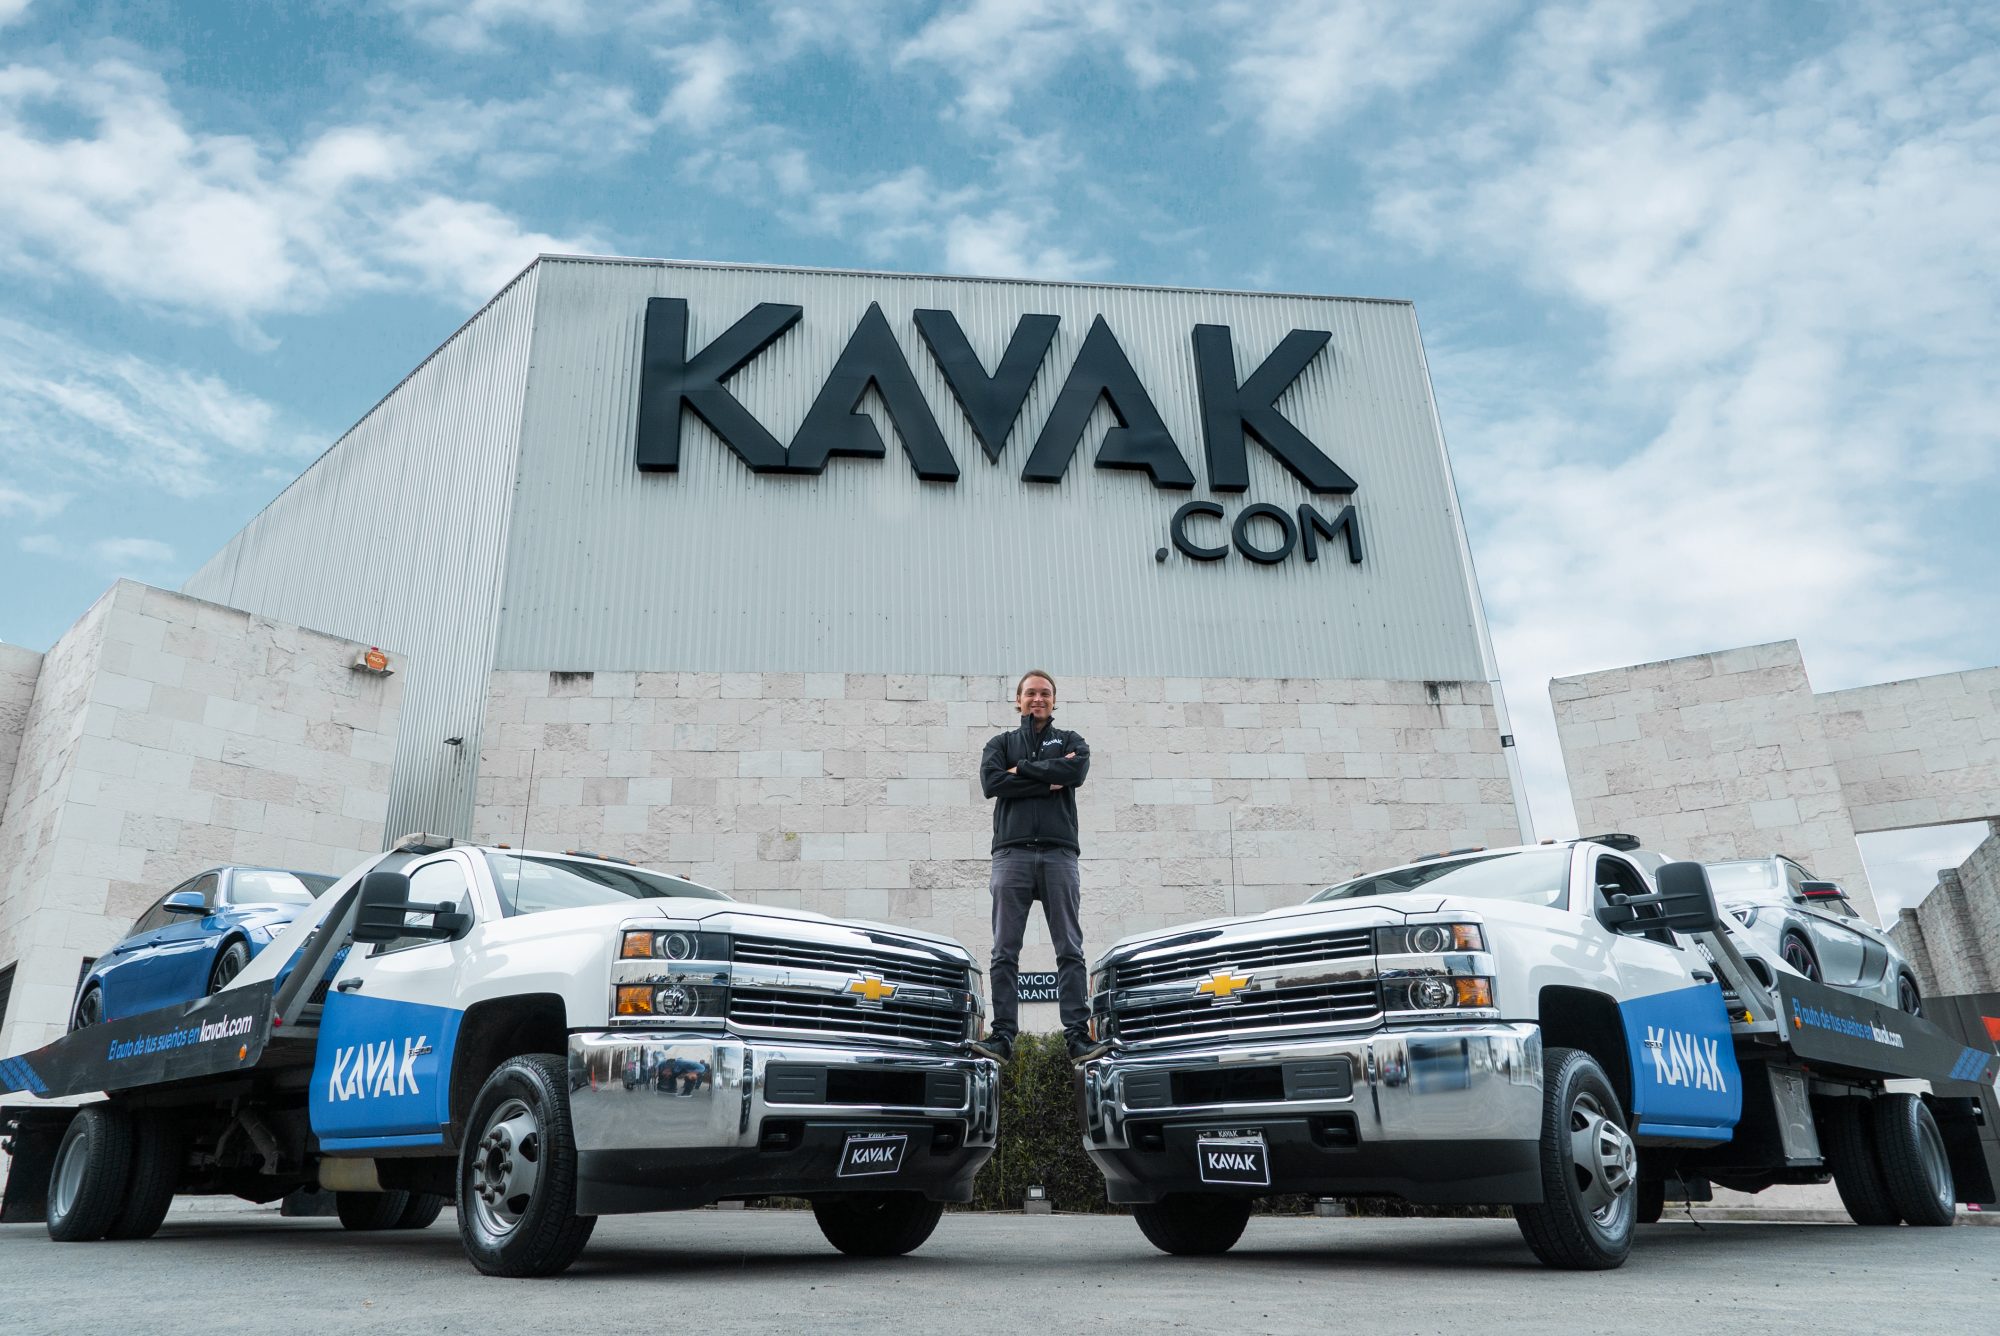 Mexico’s Kavak drives away with 0M in new funding, doubling its valuation to .7B